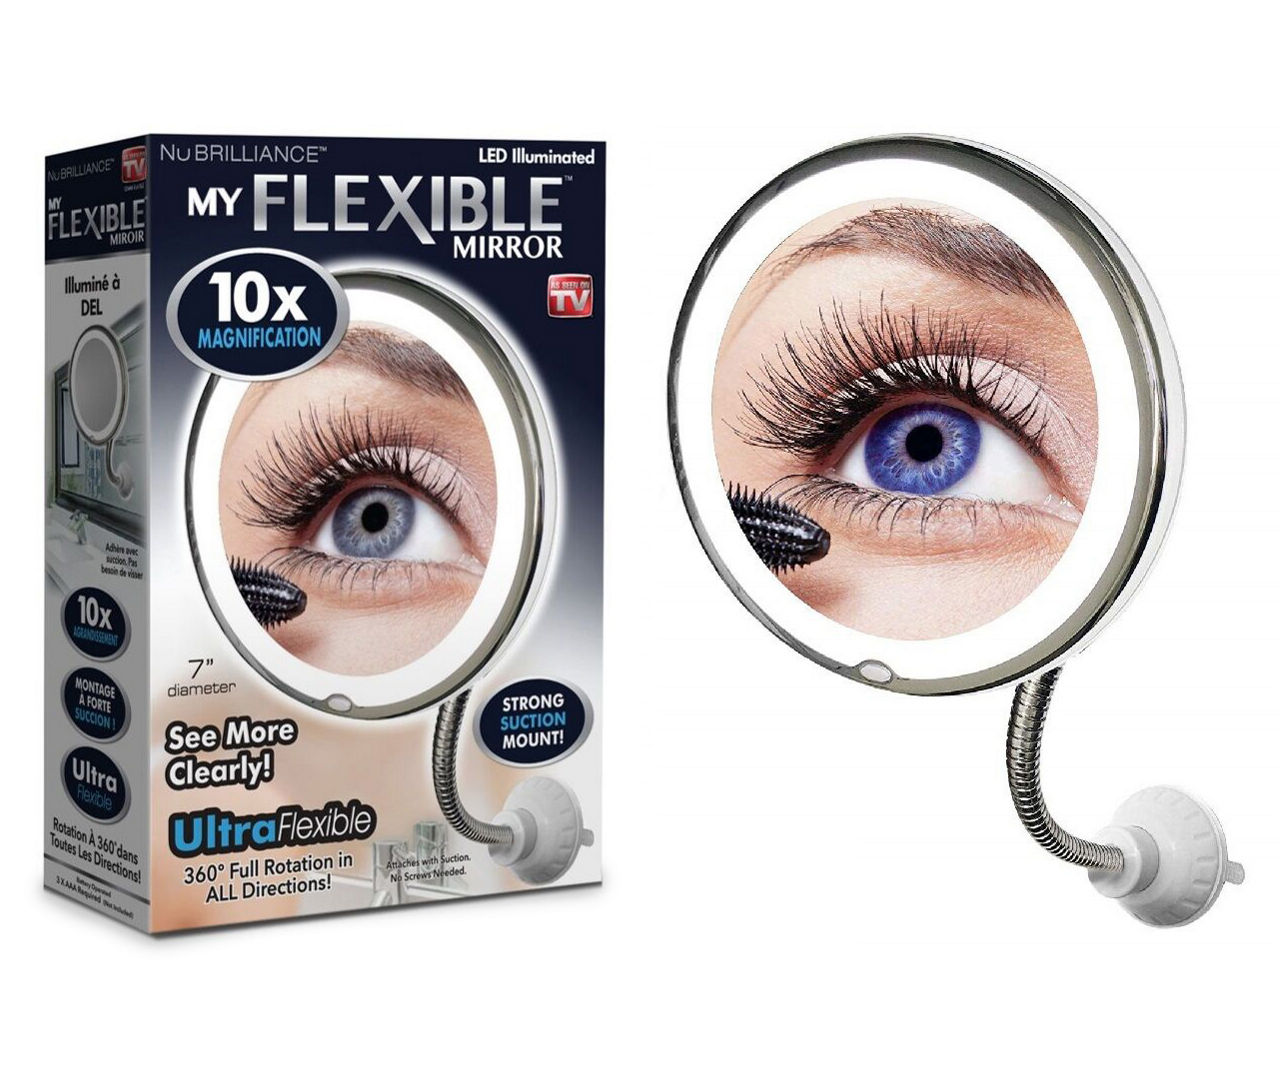 My Flexible Mirror 10x Magnification 7” Make Up Round Vanity Flexible  Mirror for Home, Bathroom use with Super Strong Suction Cups As Seen On TV